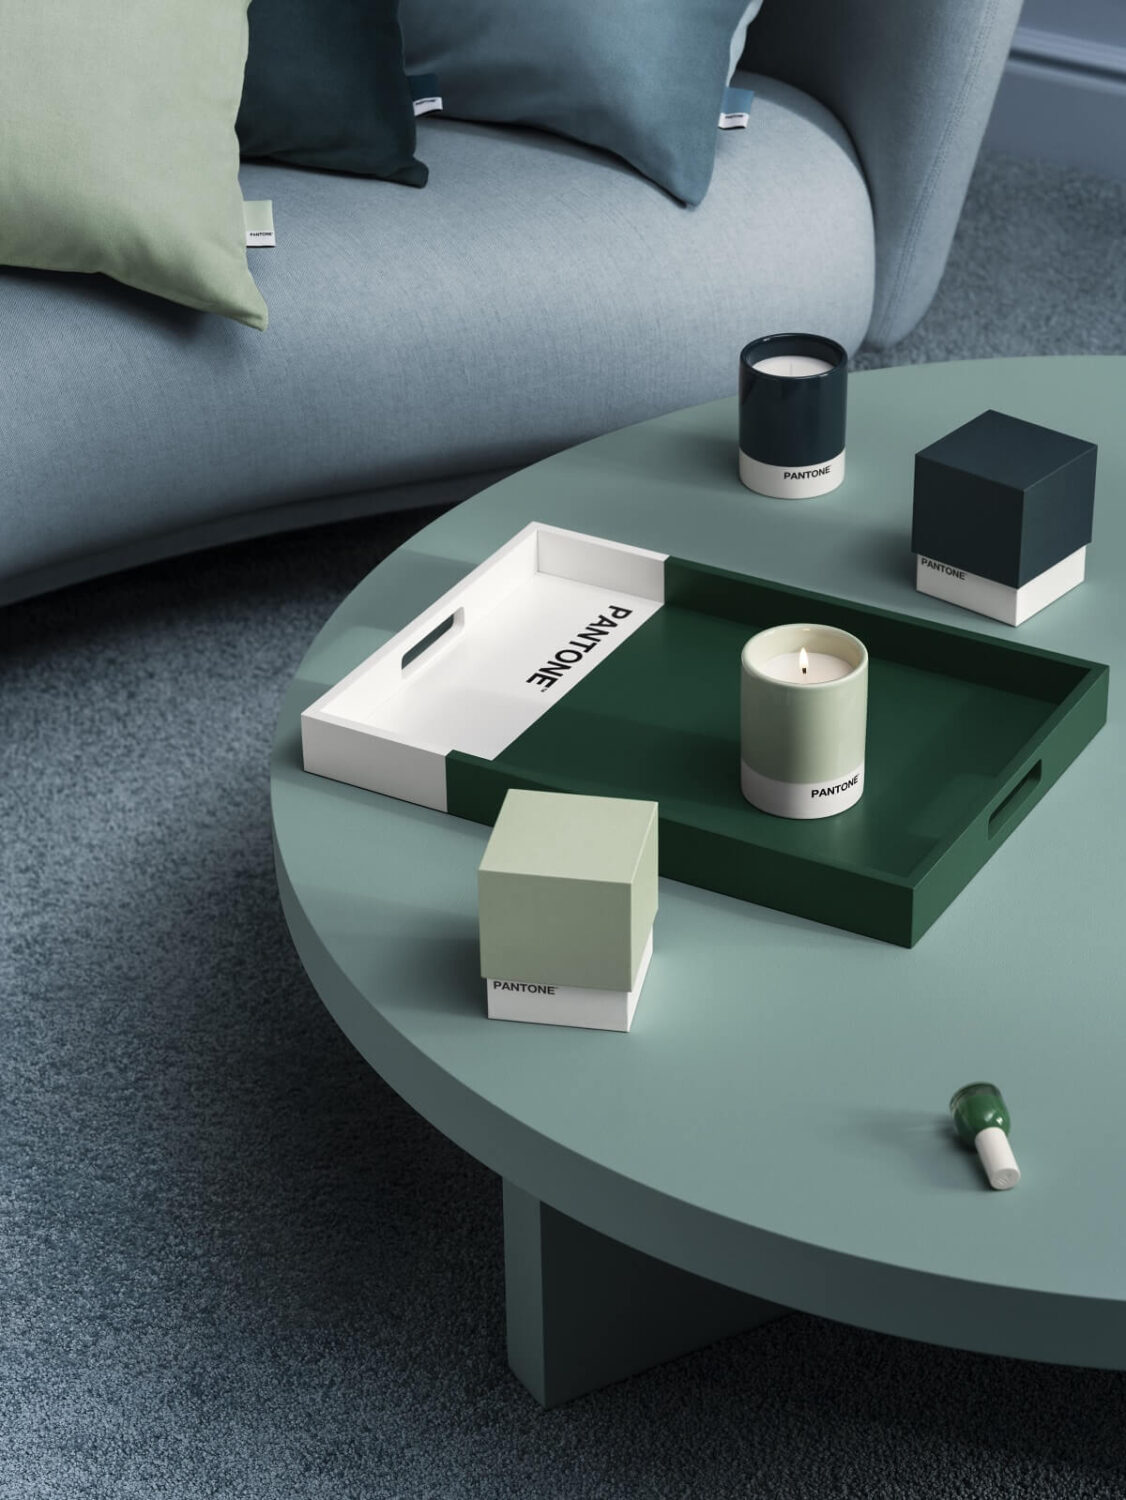 H&M-Home-Pantone-The-Power-of-Color-calm-soothing-color-palette-green-blue-shades-nordroom